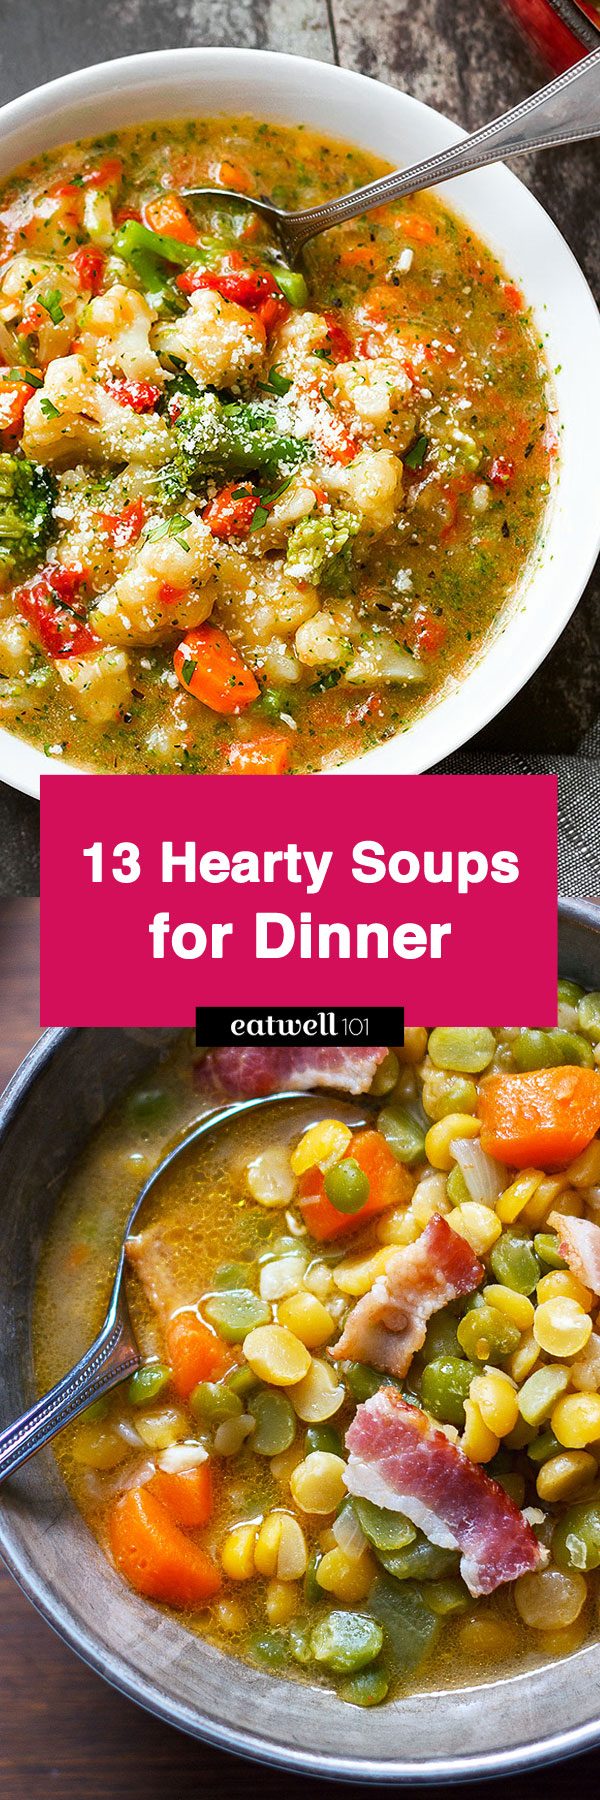 13 Hearty Soup Recipes for Dinner - Quick and simple, here's a collection of 13 super easy soup recipes to enjoy as a full meal.